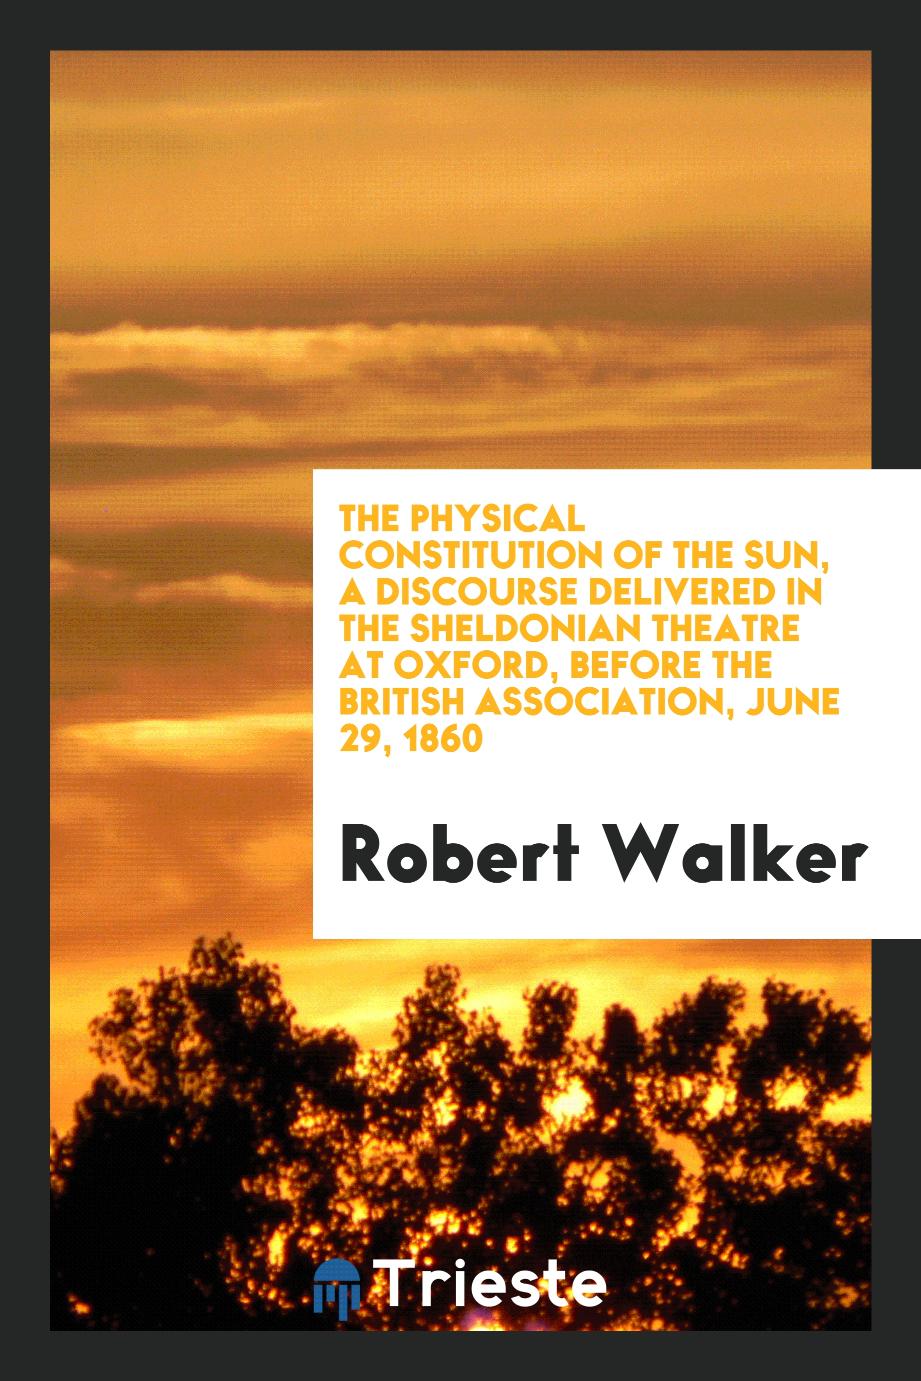 The physical constitution of the sun, a discourse delivered in the sheldonian theatre at oxford, before the british association, june 29, 1860